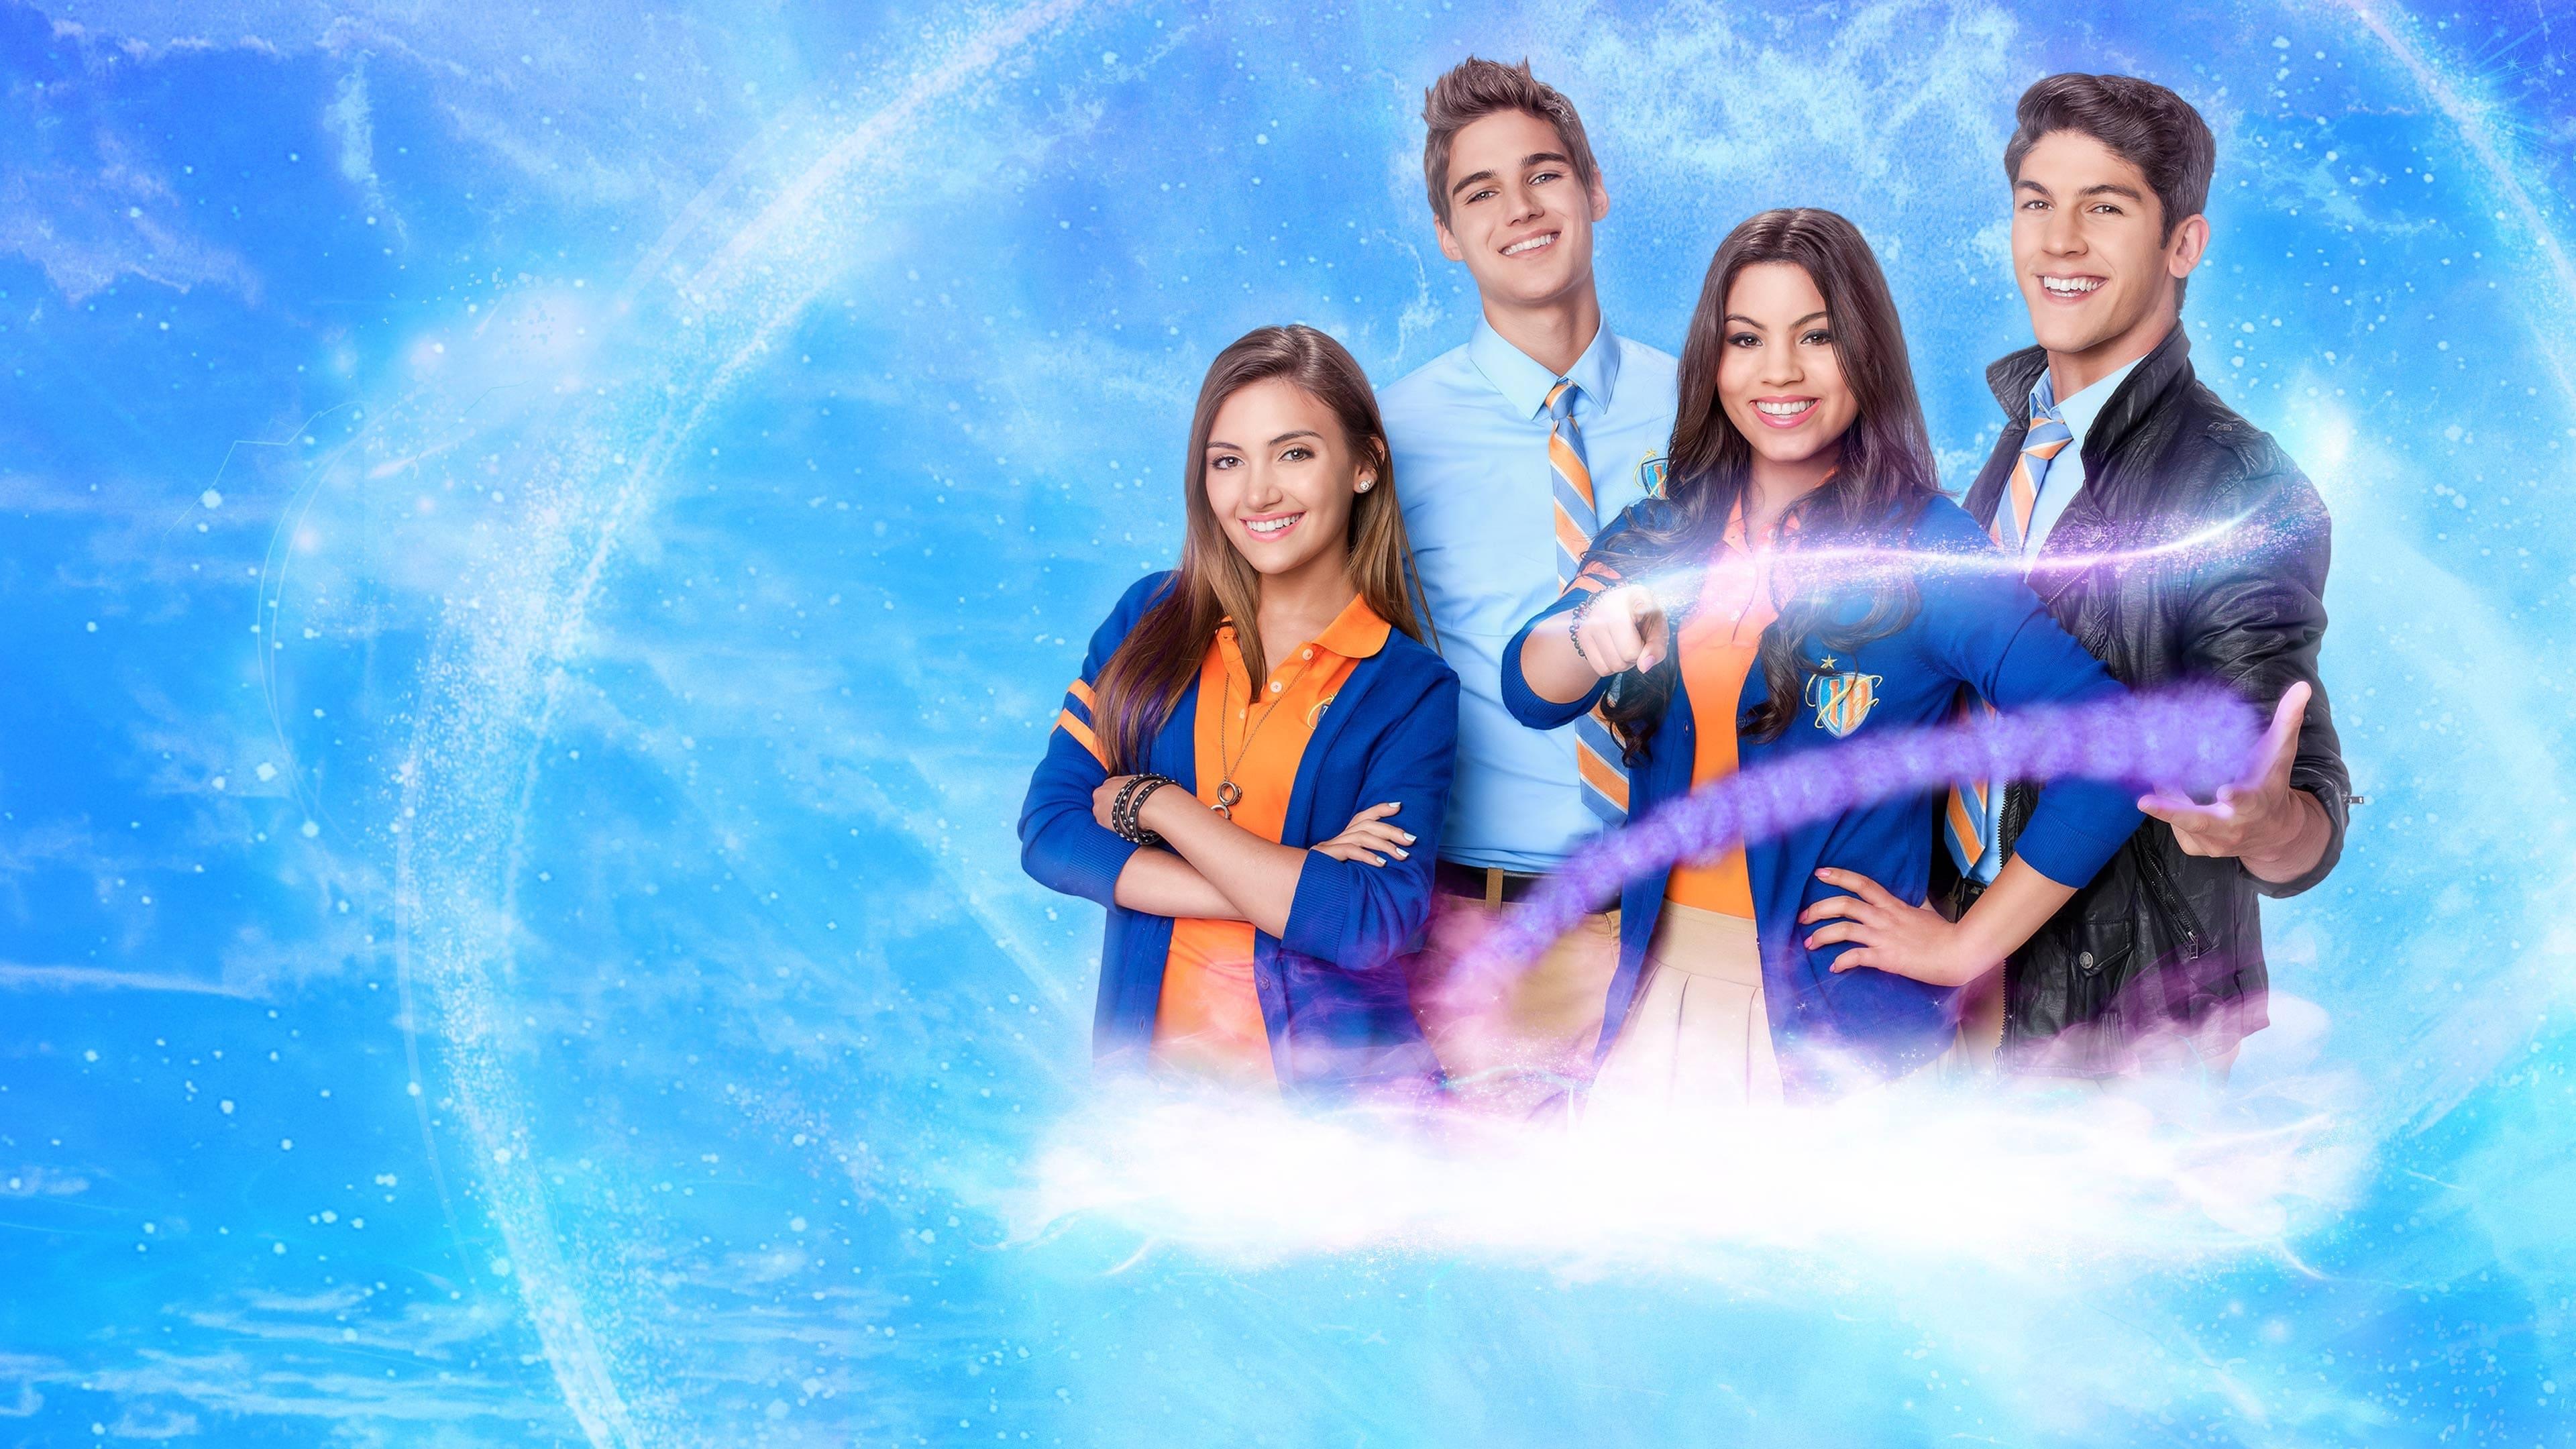 Every Witch Way backdrop